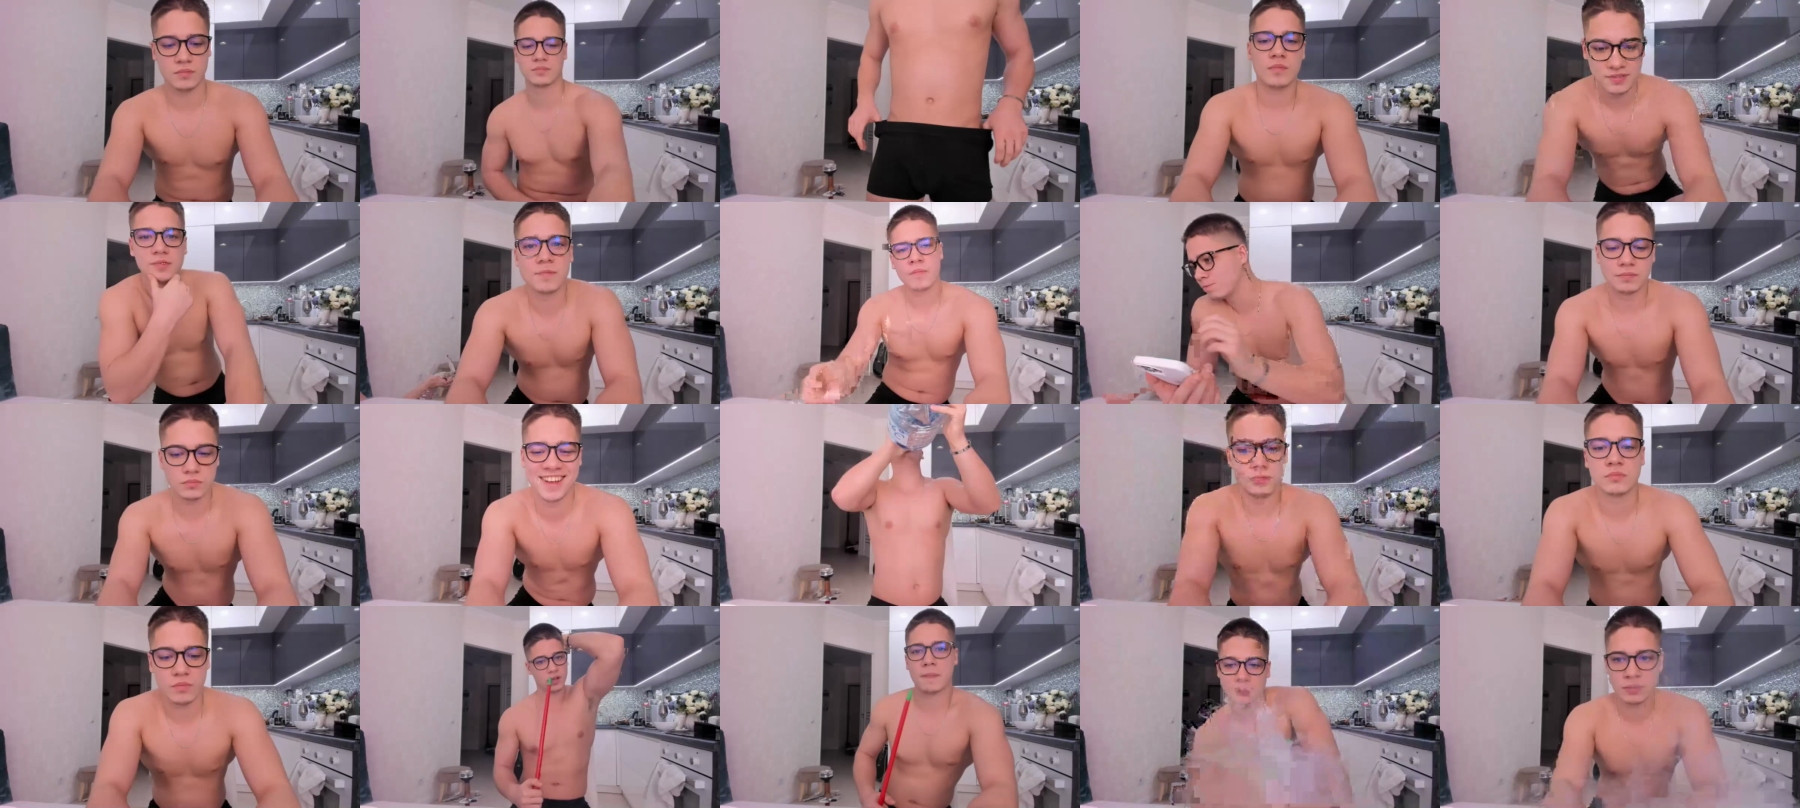 Realsupermichael Naked CAM SHOW @ Chaturbate 29-04-2021